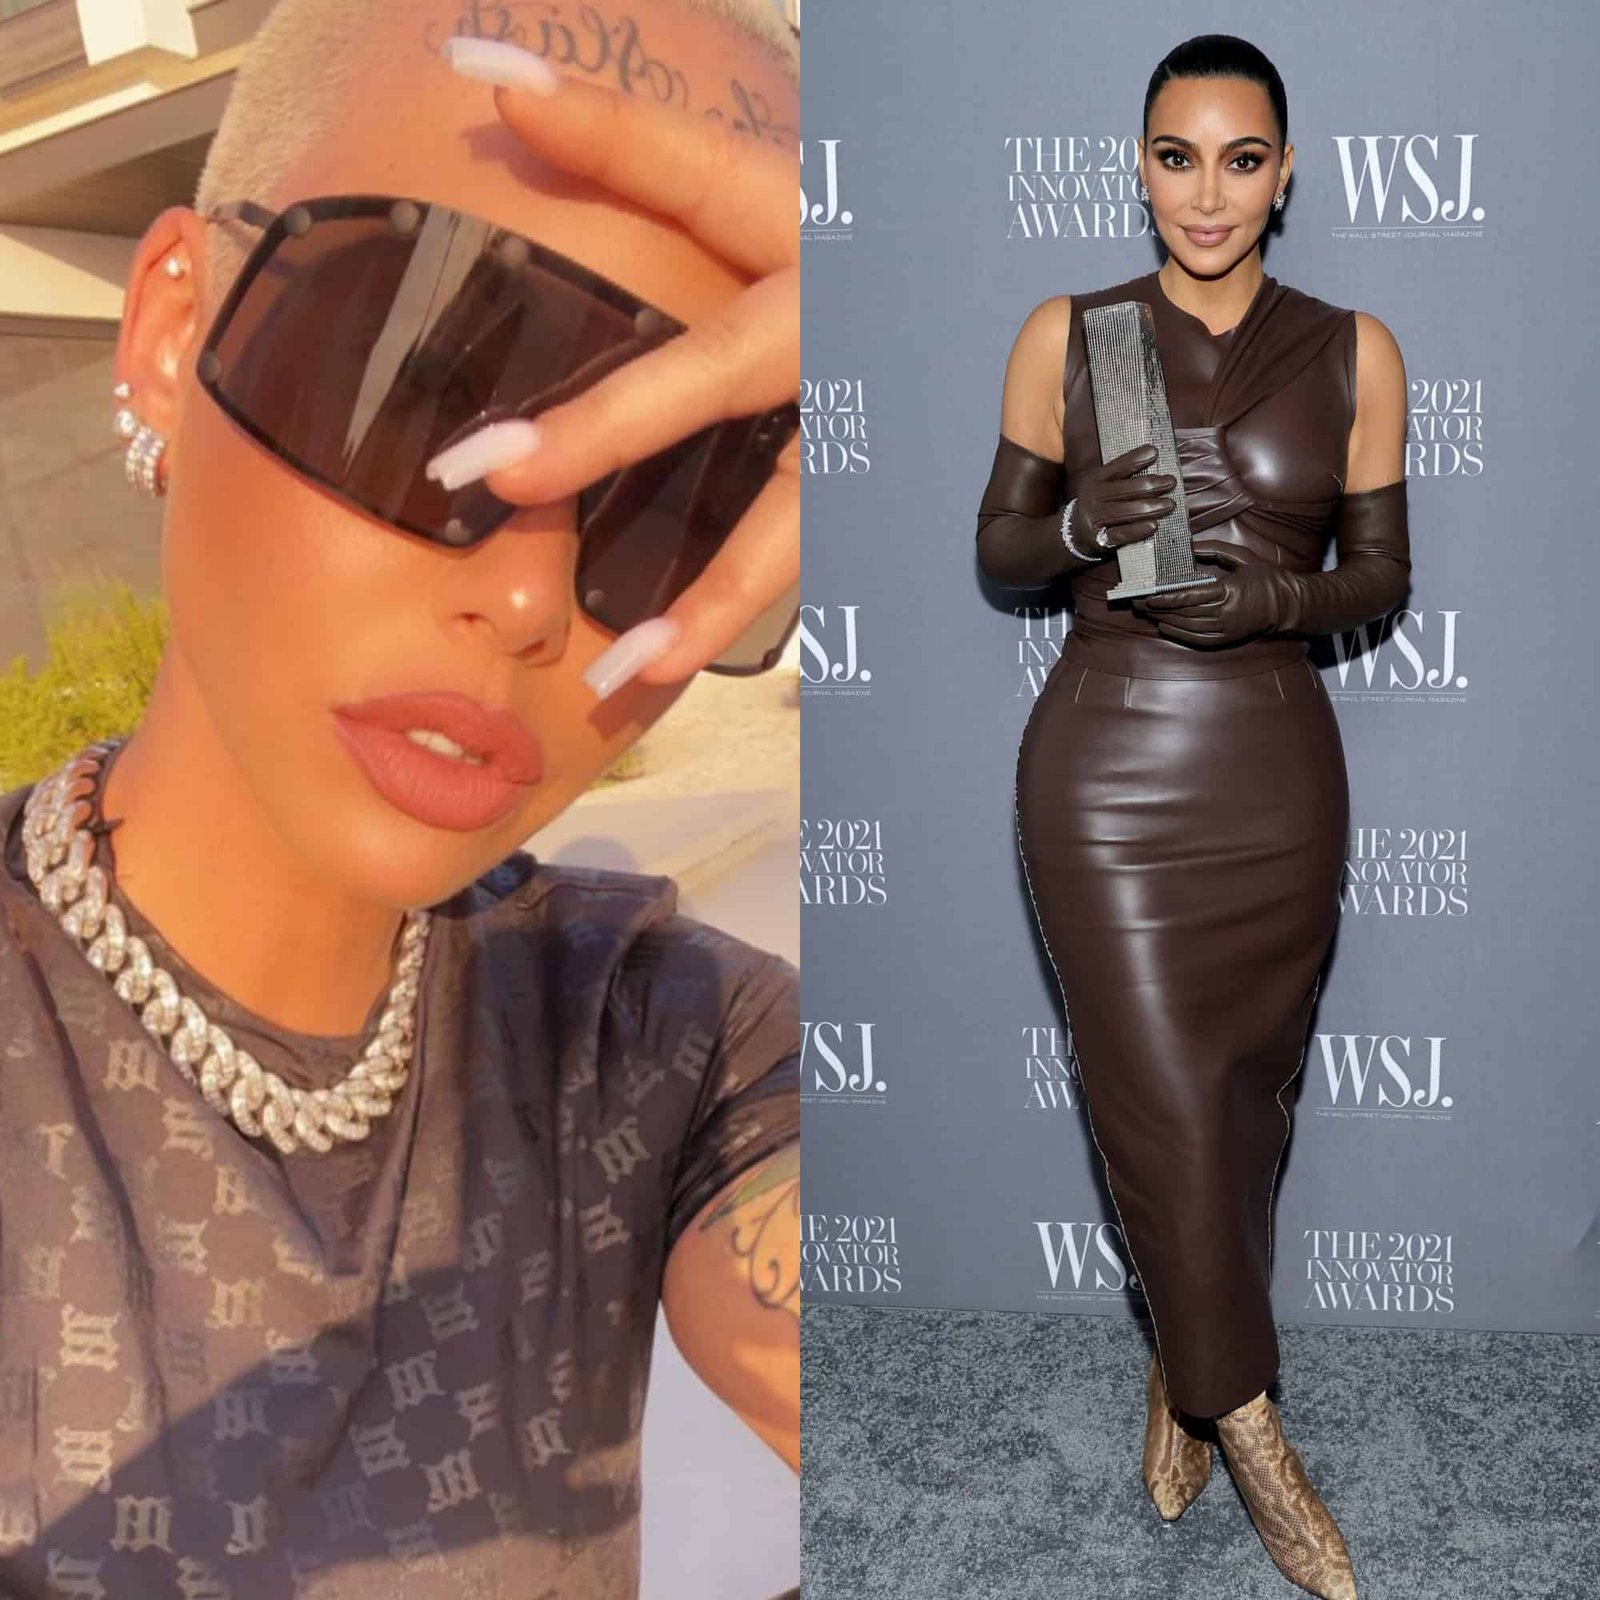 Amber Rose Shares A Message Concerning Her Resurfaced Tweet, Says Kim Kardashian & Her Sisters Didn’t Deserve What She Wrote